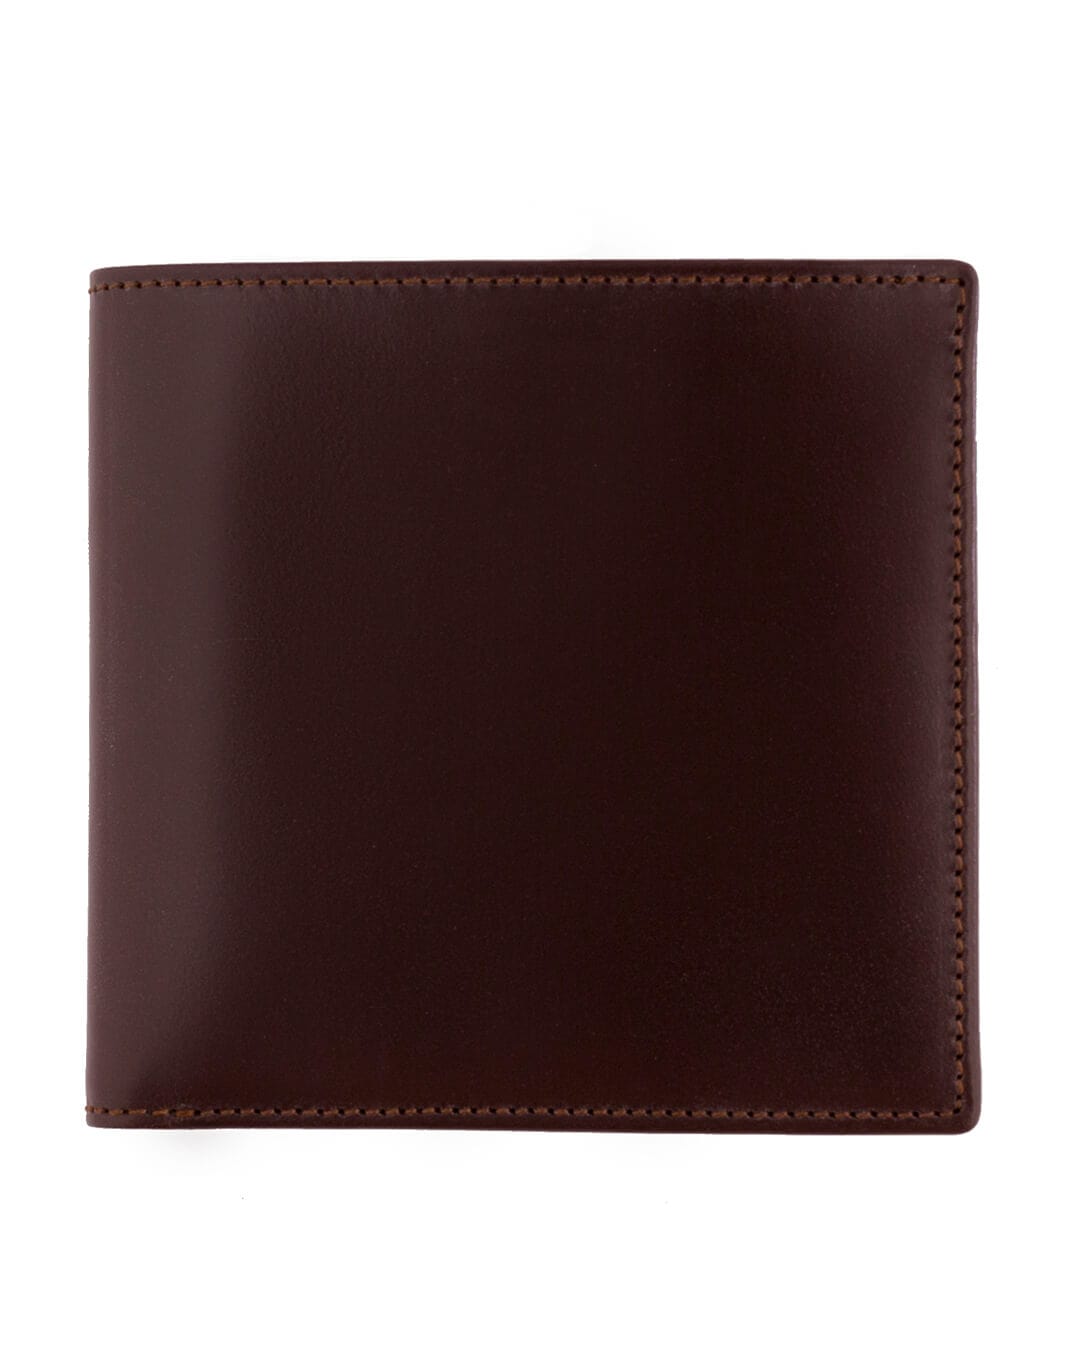 Cavesson's Wallets Cavesson's Brown And Orange Coin Wallet